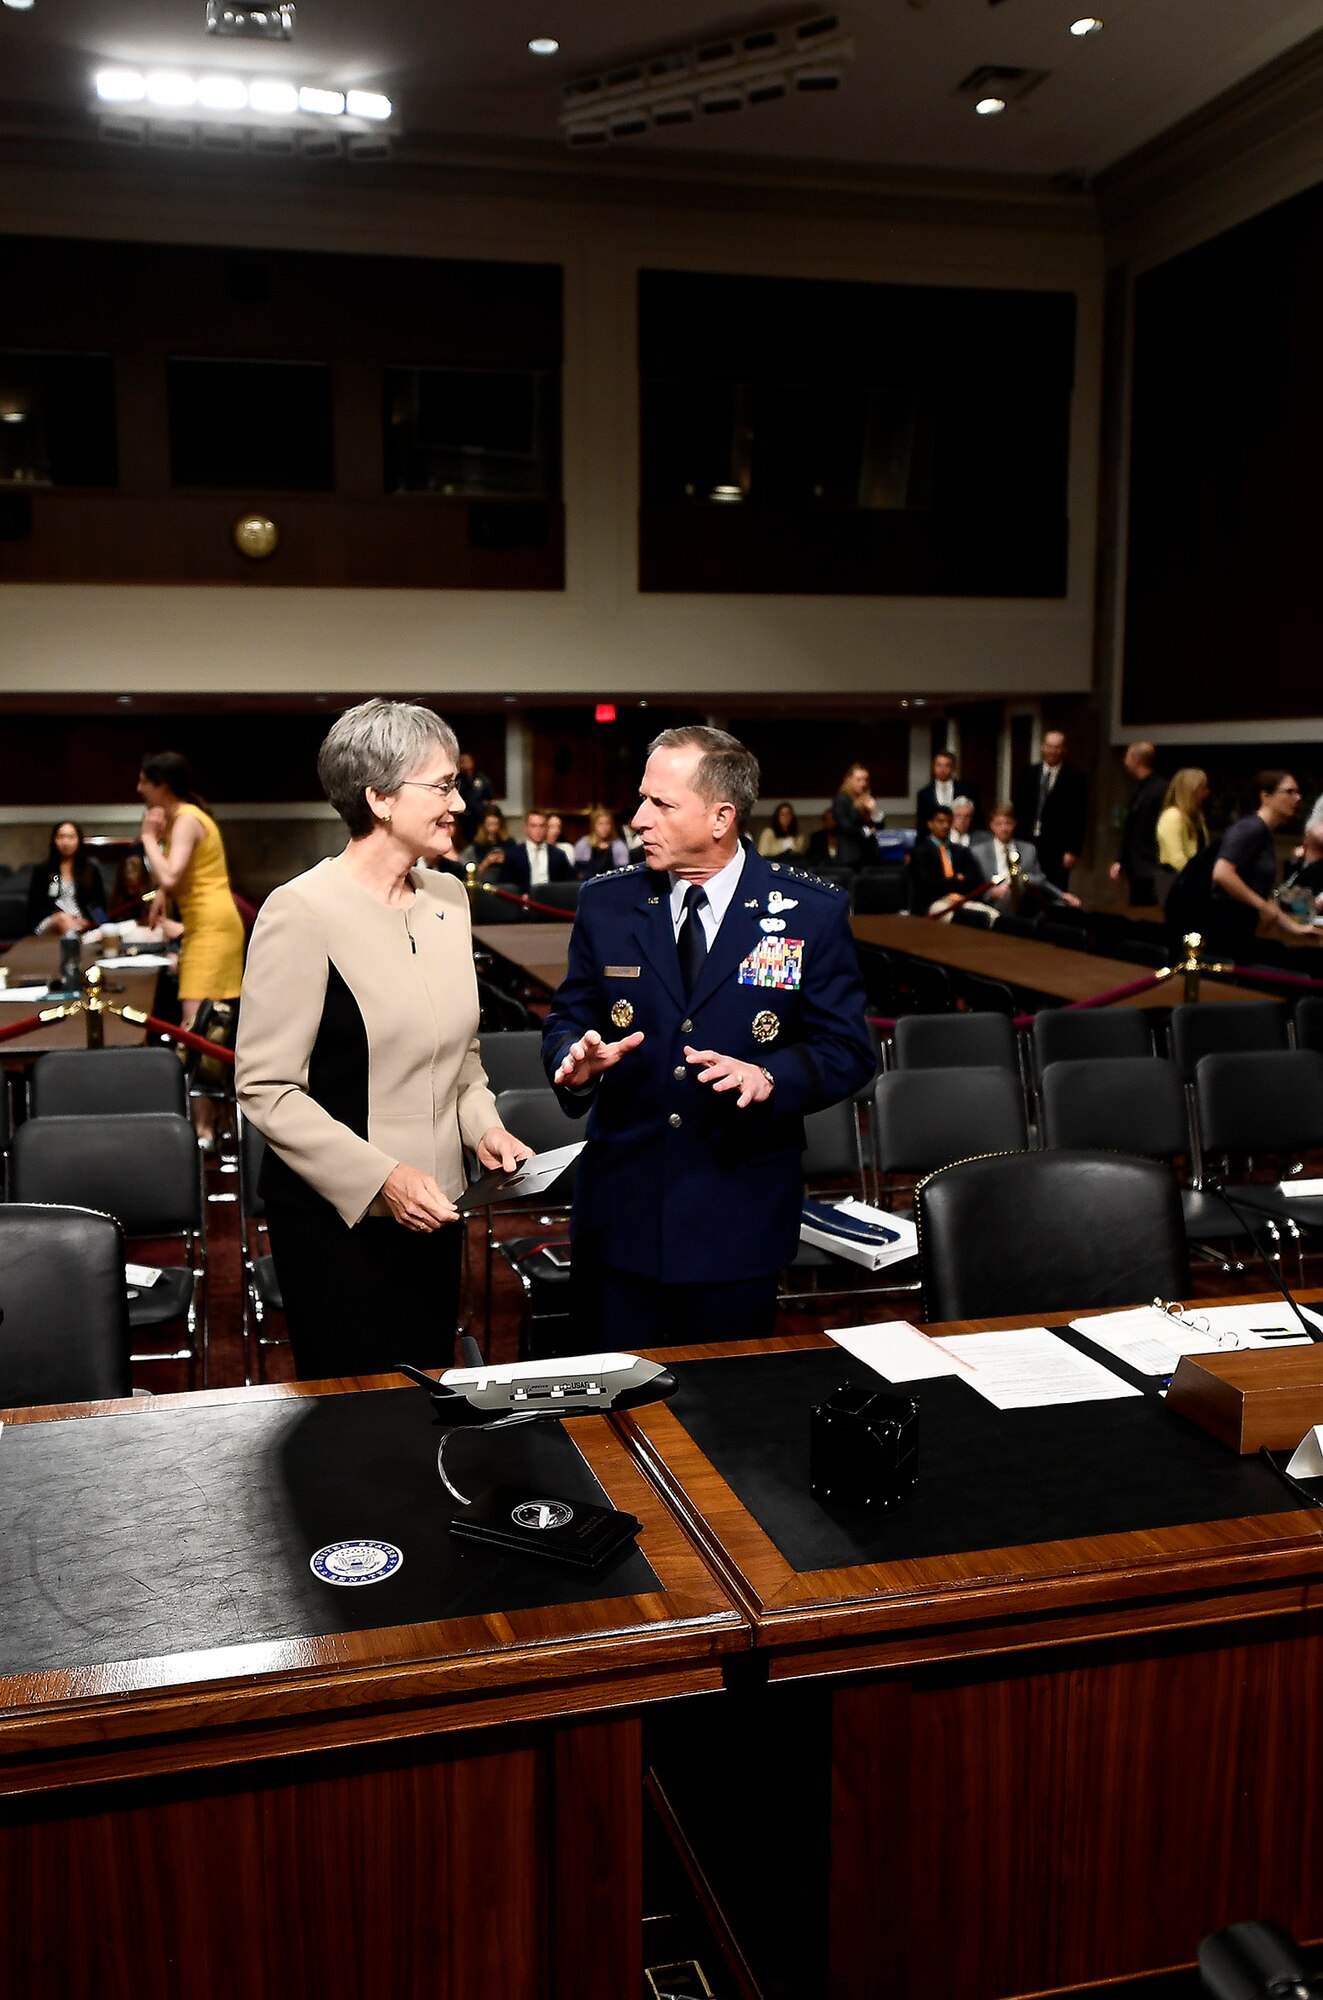 Secretary of the Air Force heather Wilson and Air Force Chief of Staff Gen. David Goldfein prepare to testify before the Senate Armed Services Committee June 6, 2017, in Washington, D.C.  The top leaders gave their testimony on the posture of the Department of the Air Force in review of the Defense Authorization Request for Fiscal Year 2018 and the Future Years' Defense Program. (U.S. Air Force photo/Scott M. Ash) 